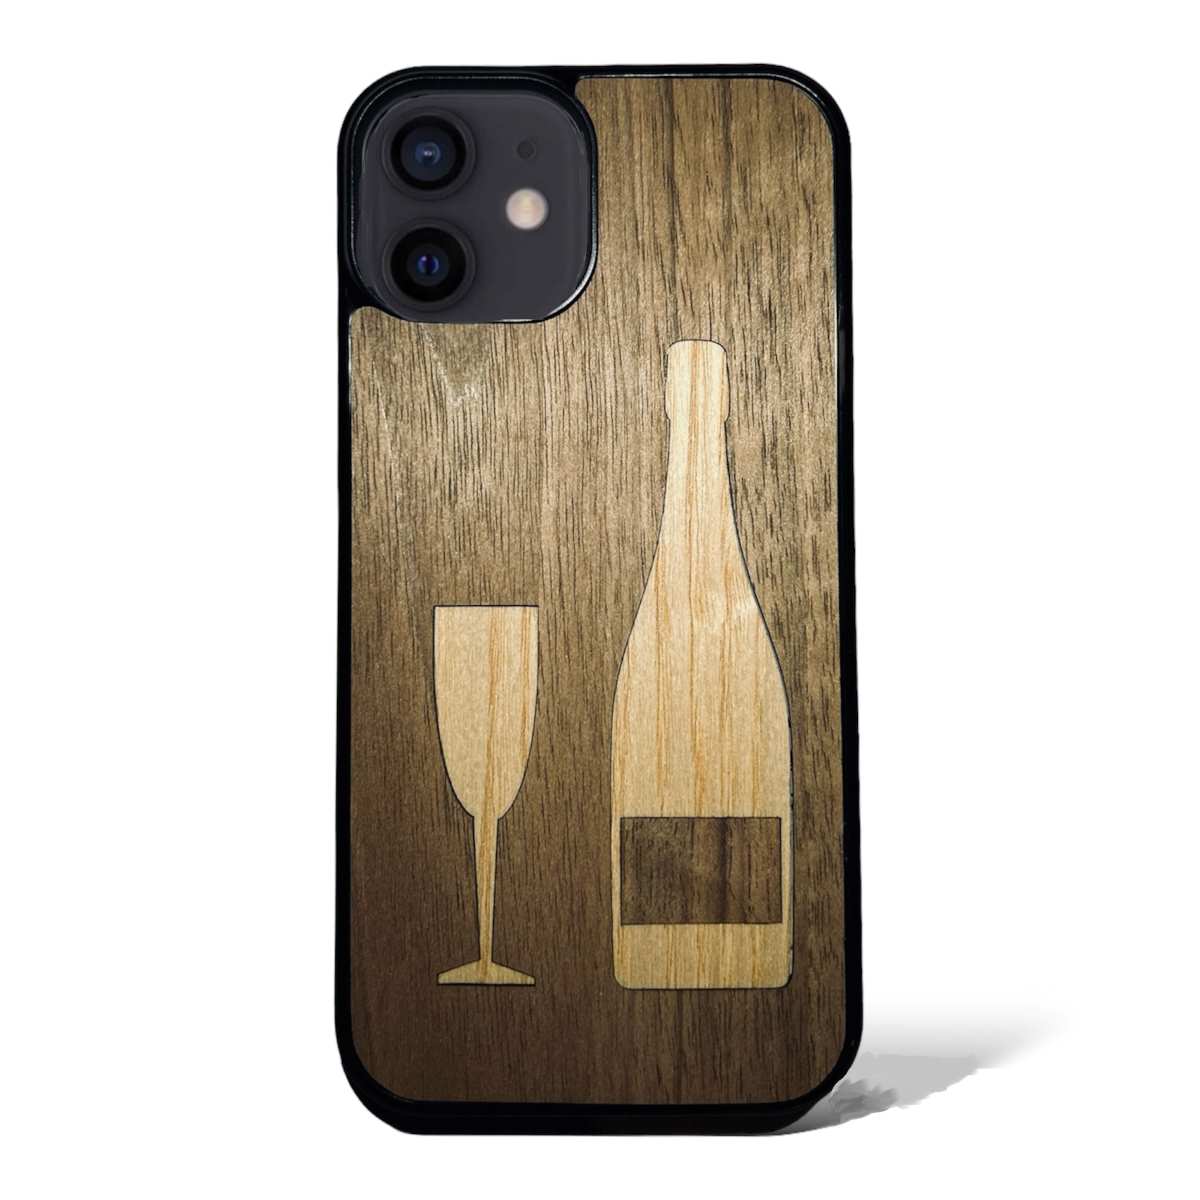 Iphone case - Champagne